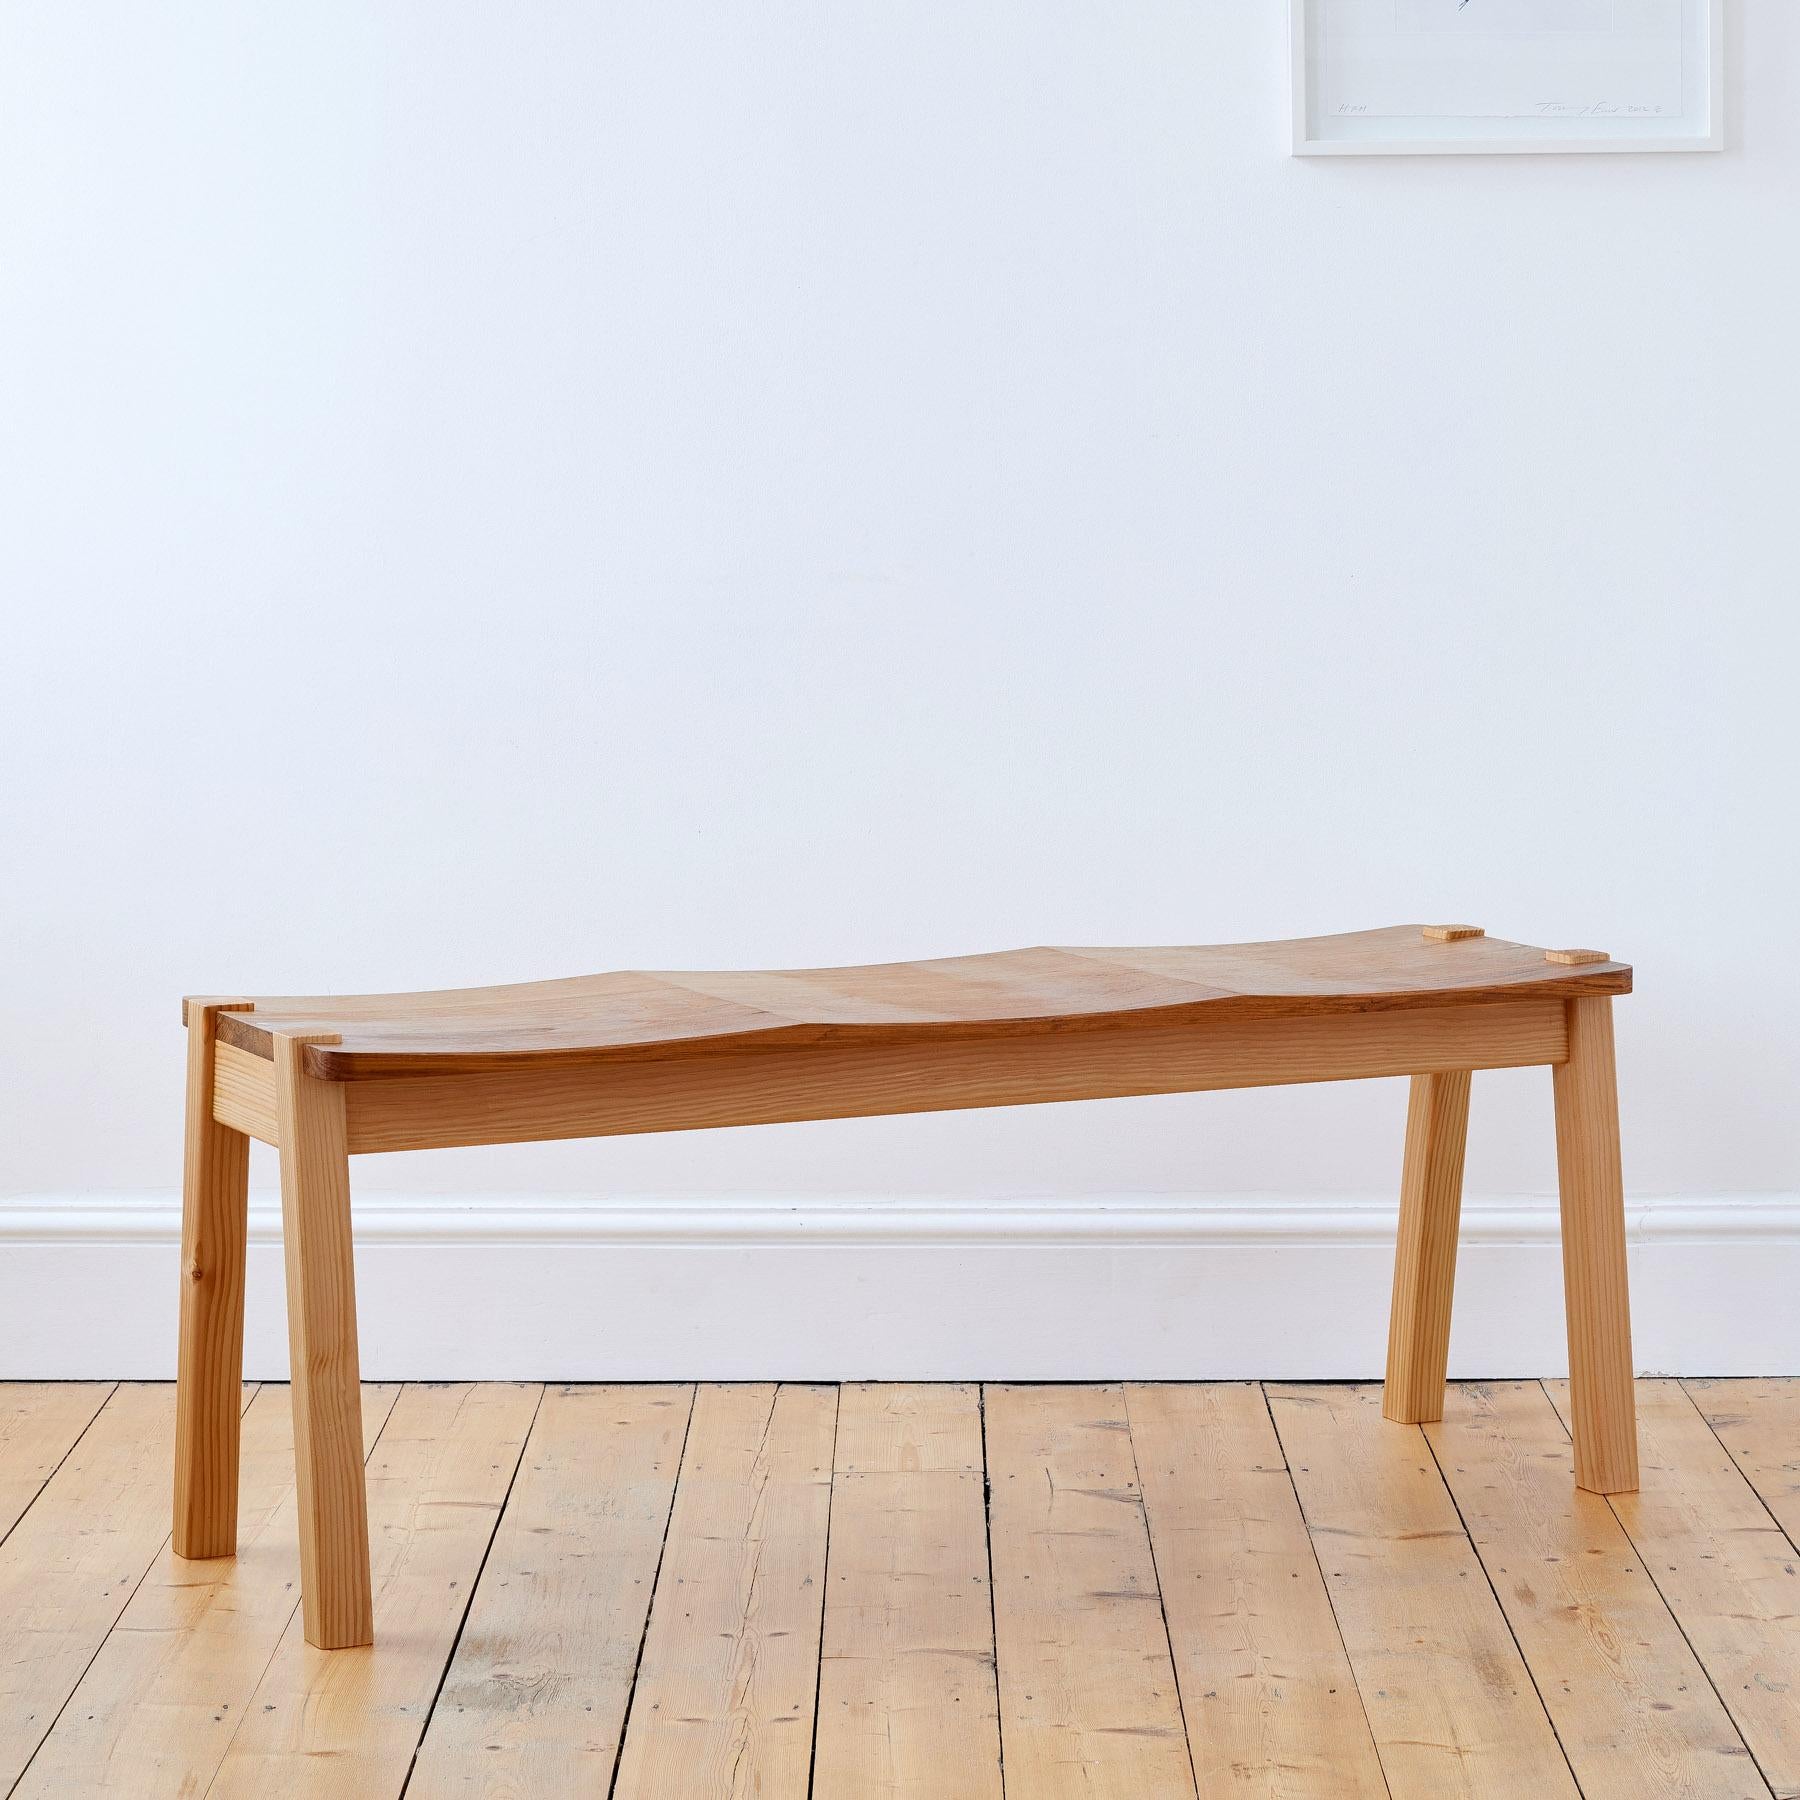 Sophisticated and elegant, the Ayrton Bench is sculpted with subtle curves providing luxurious comfort and a striking silhouette. 

A modern statement in any home, its minimal design marries two contrasting yet complementary wood types - rich elm